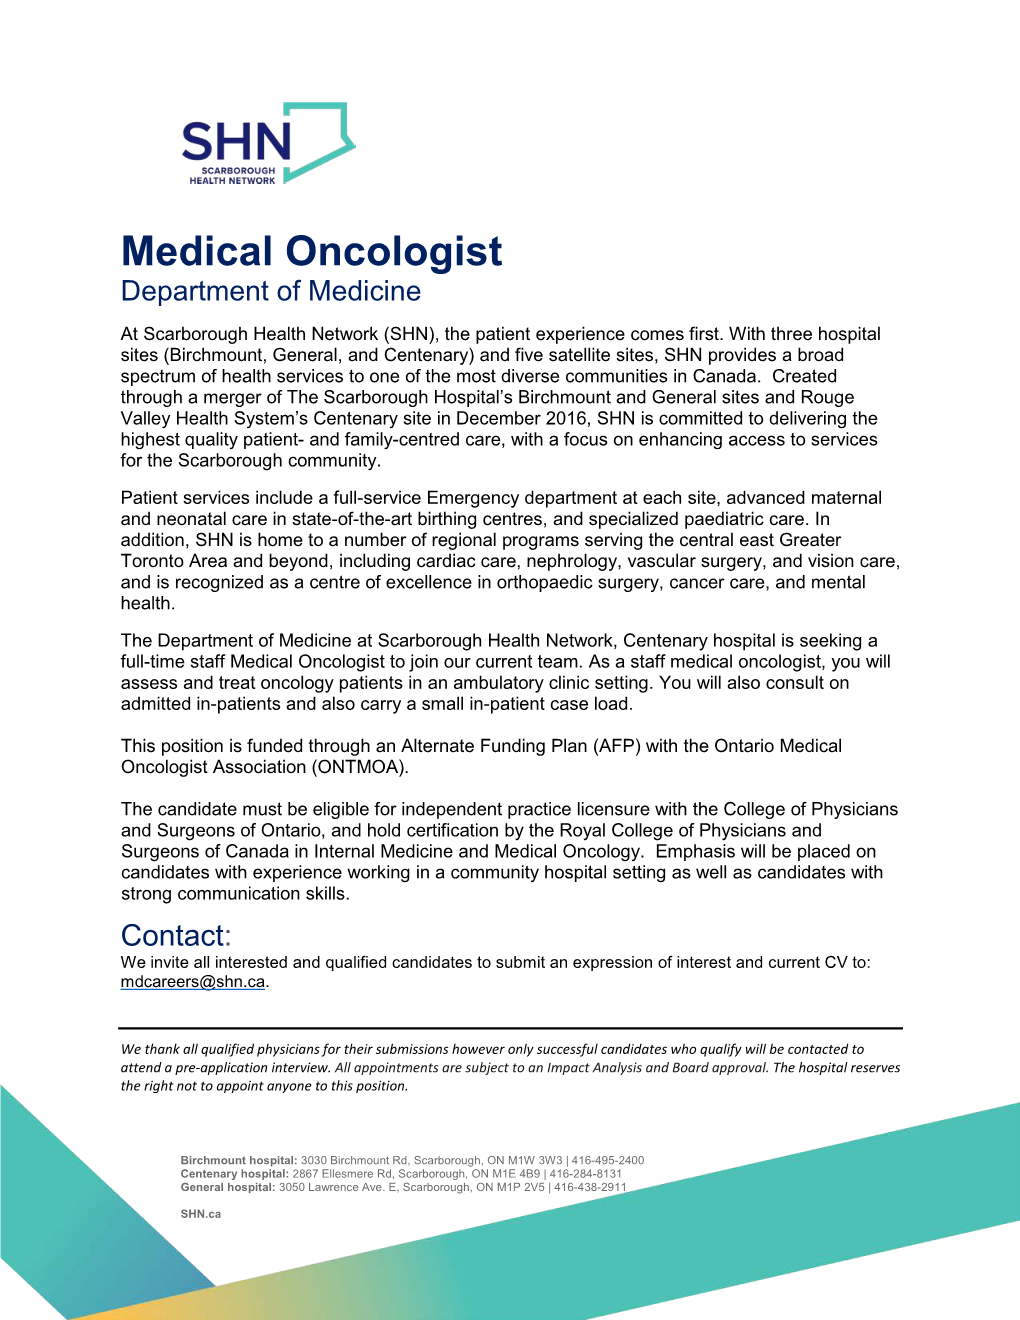 Medical Oncologist Department of Medicine at Scarborough Health Network (SHN), the Patient Experience Comes First